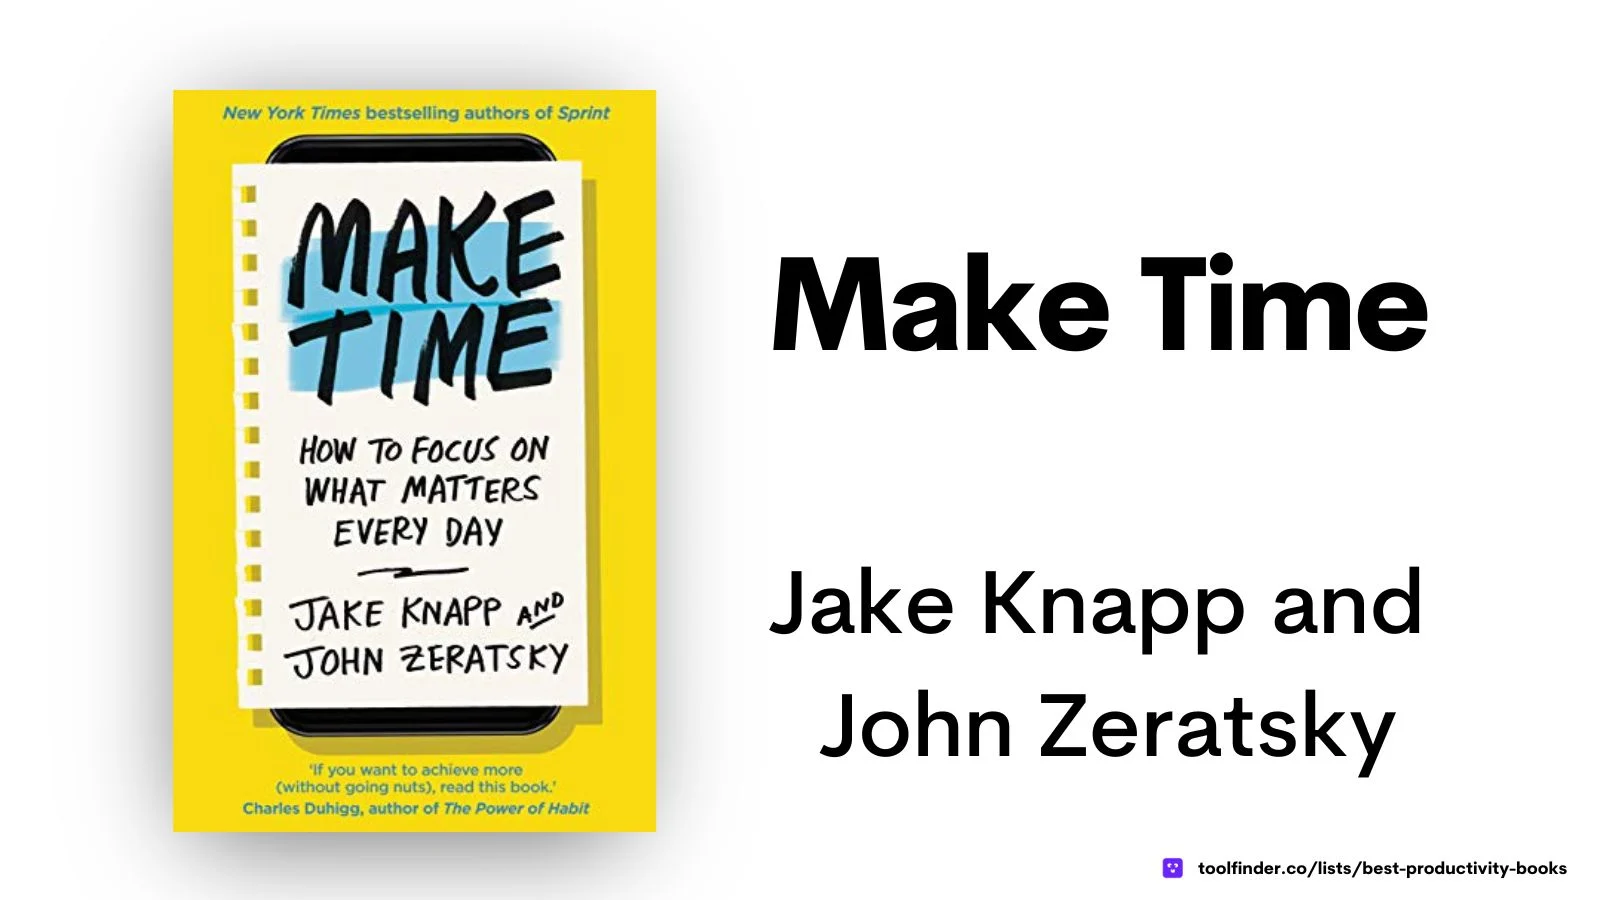 Make Time by Jake Knapp and John Zeratsky for focusing on what matters and the things you want to do.